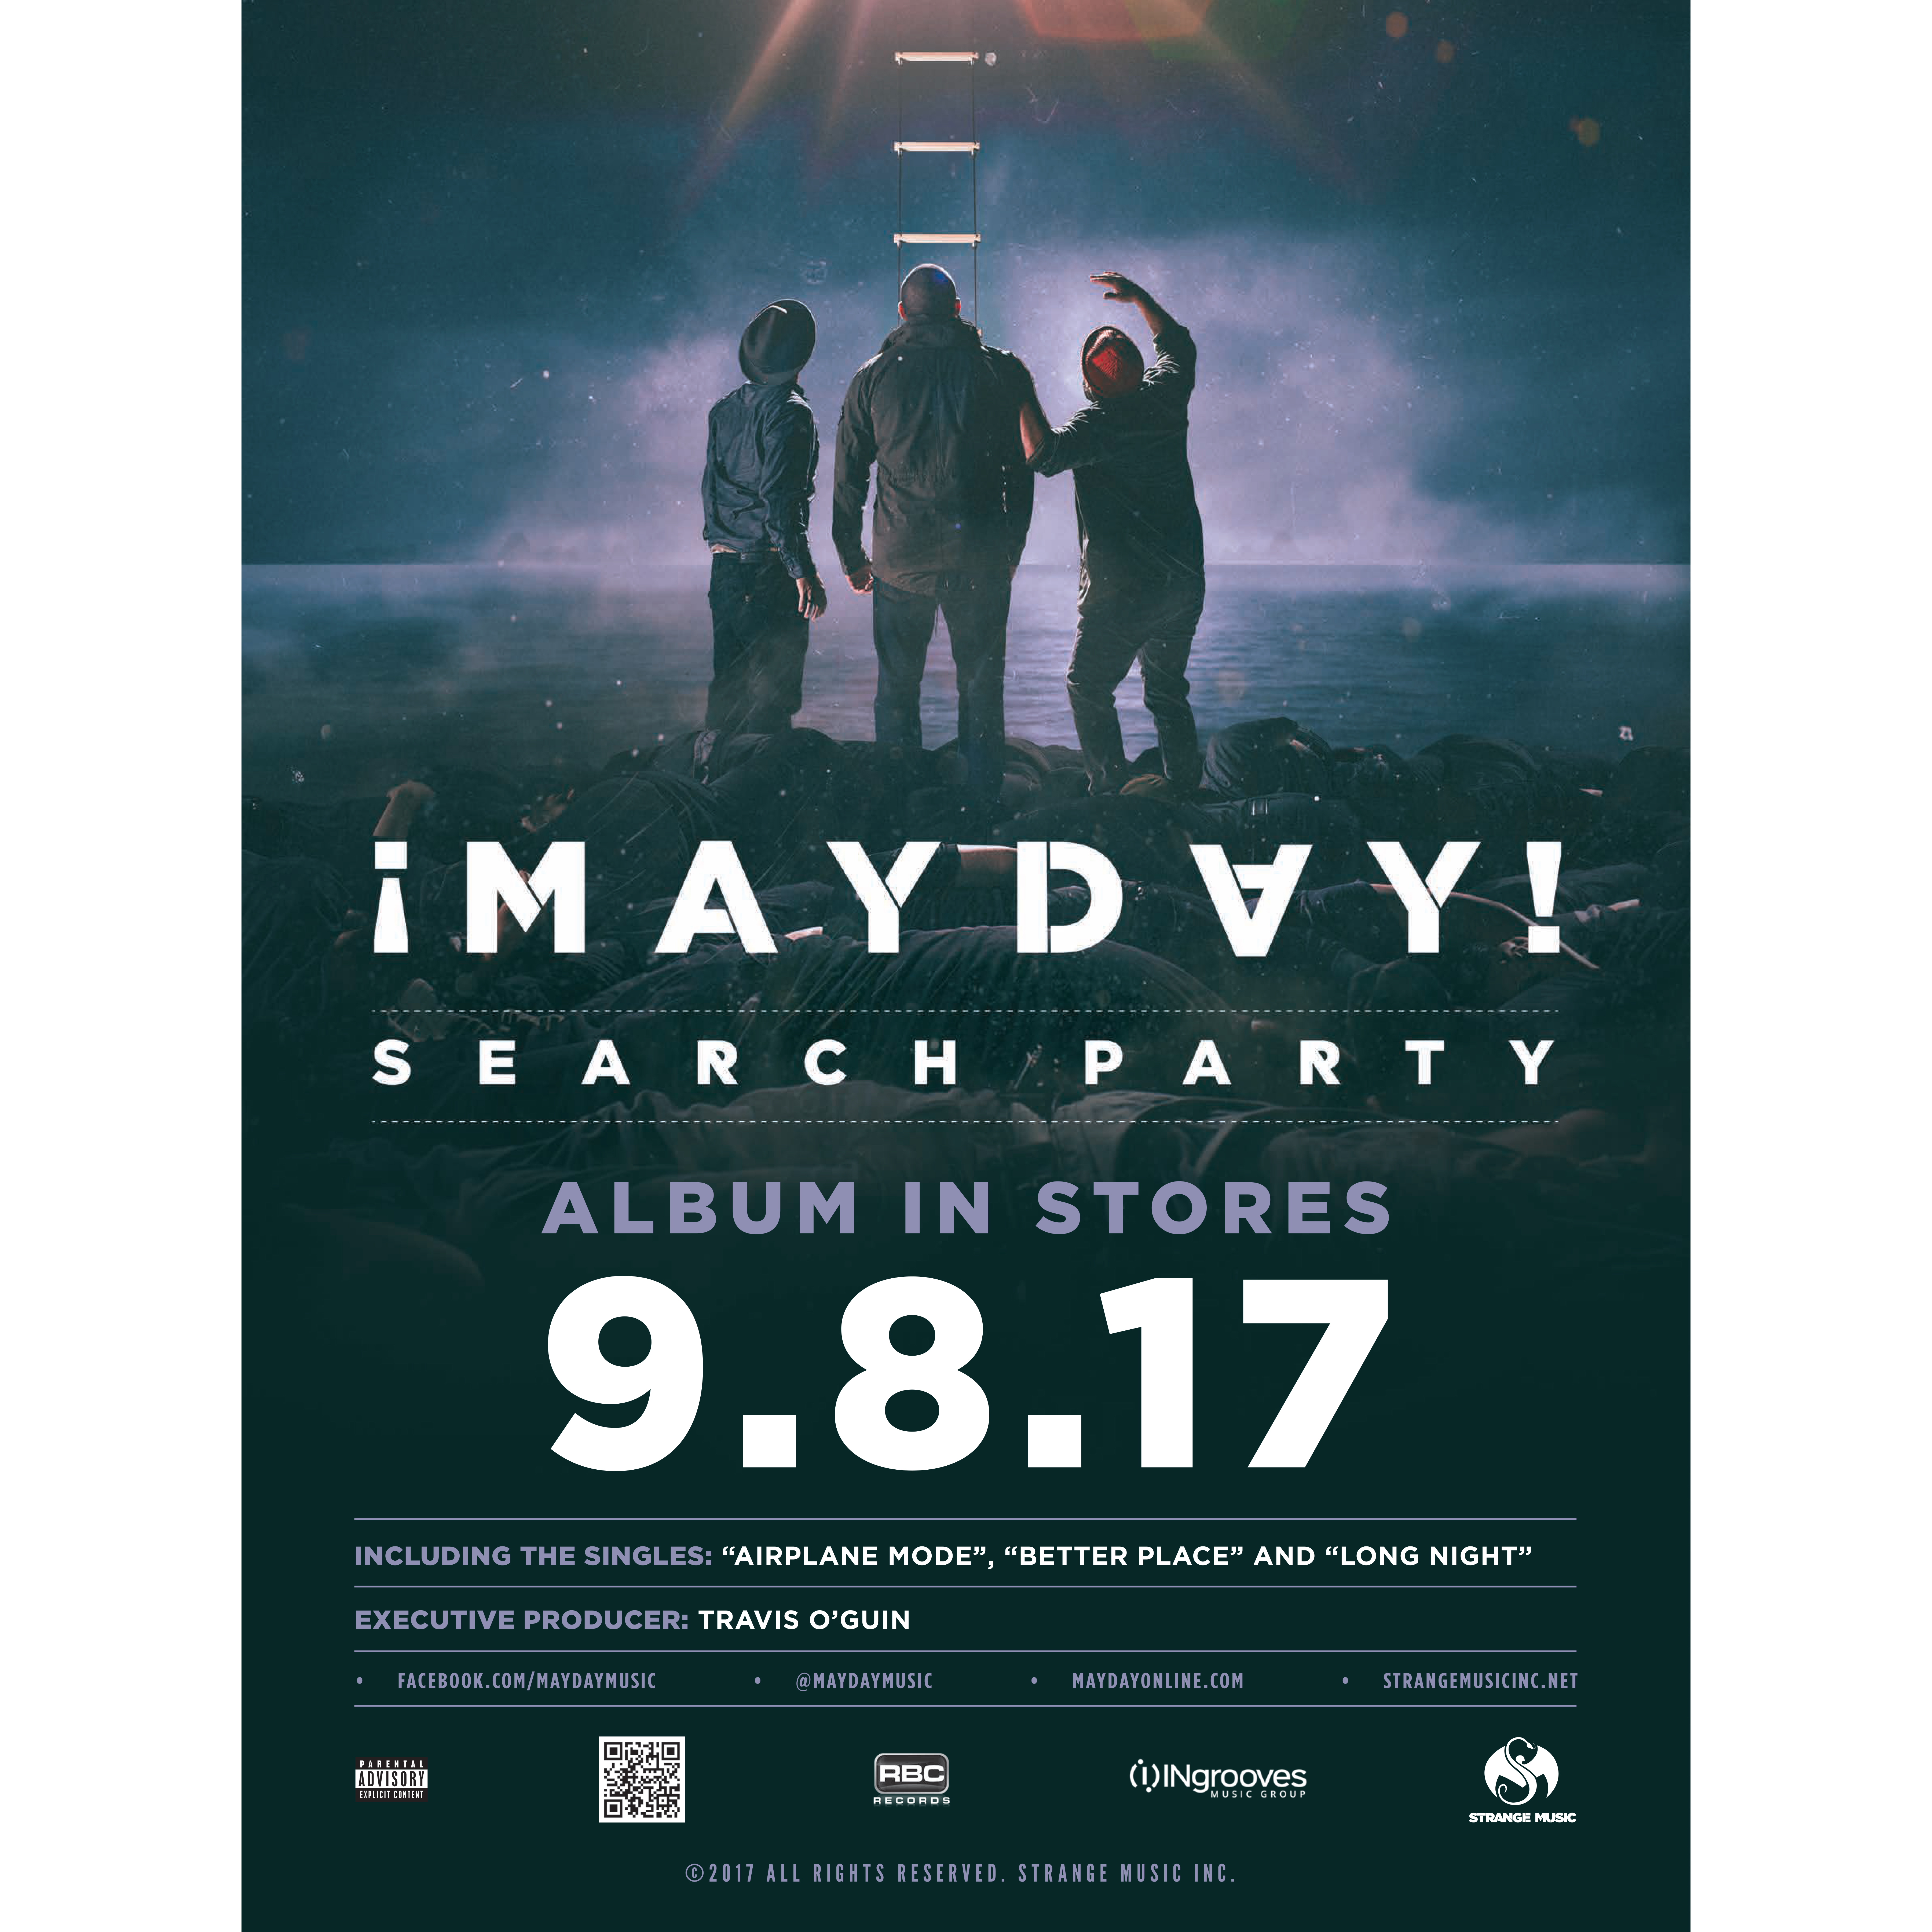 ¡MAYDAY!  -  Search Party Poster 18" x 24"